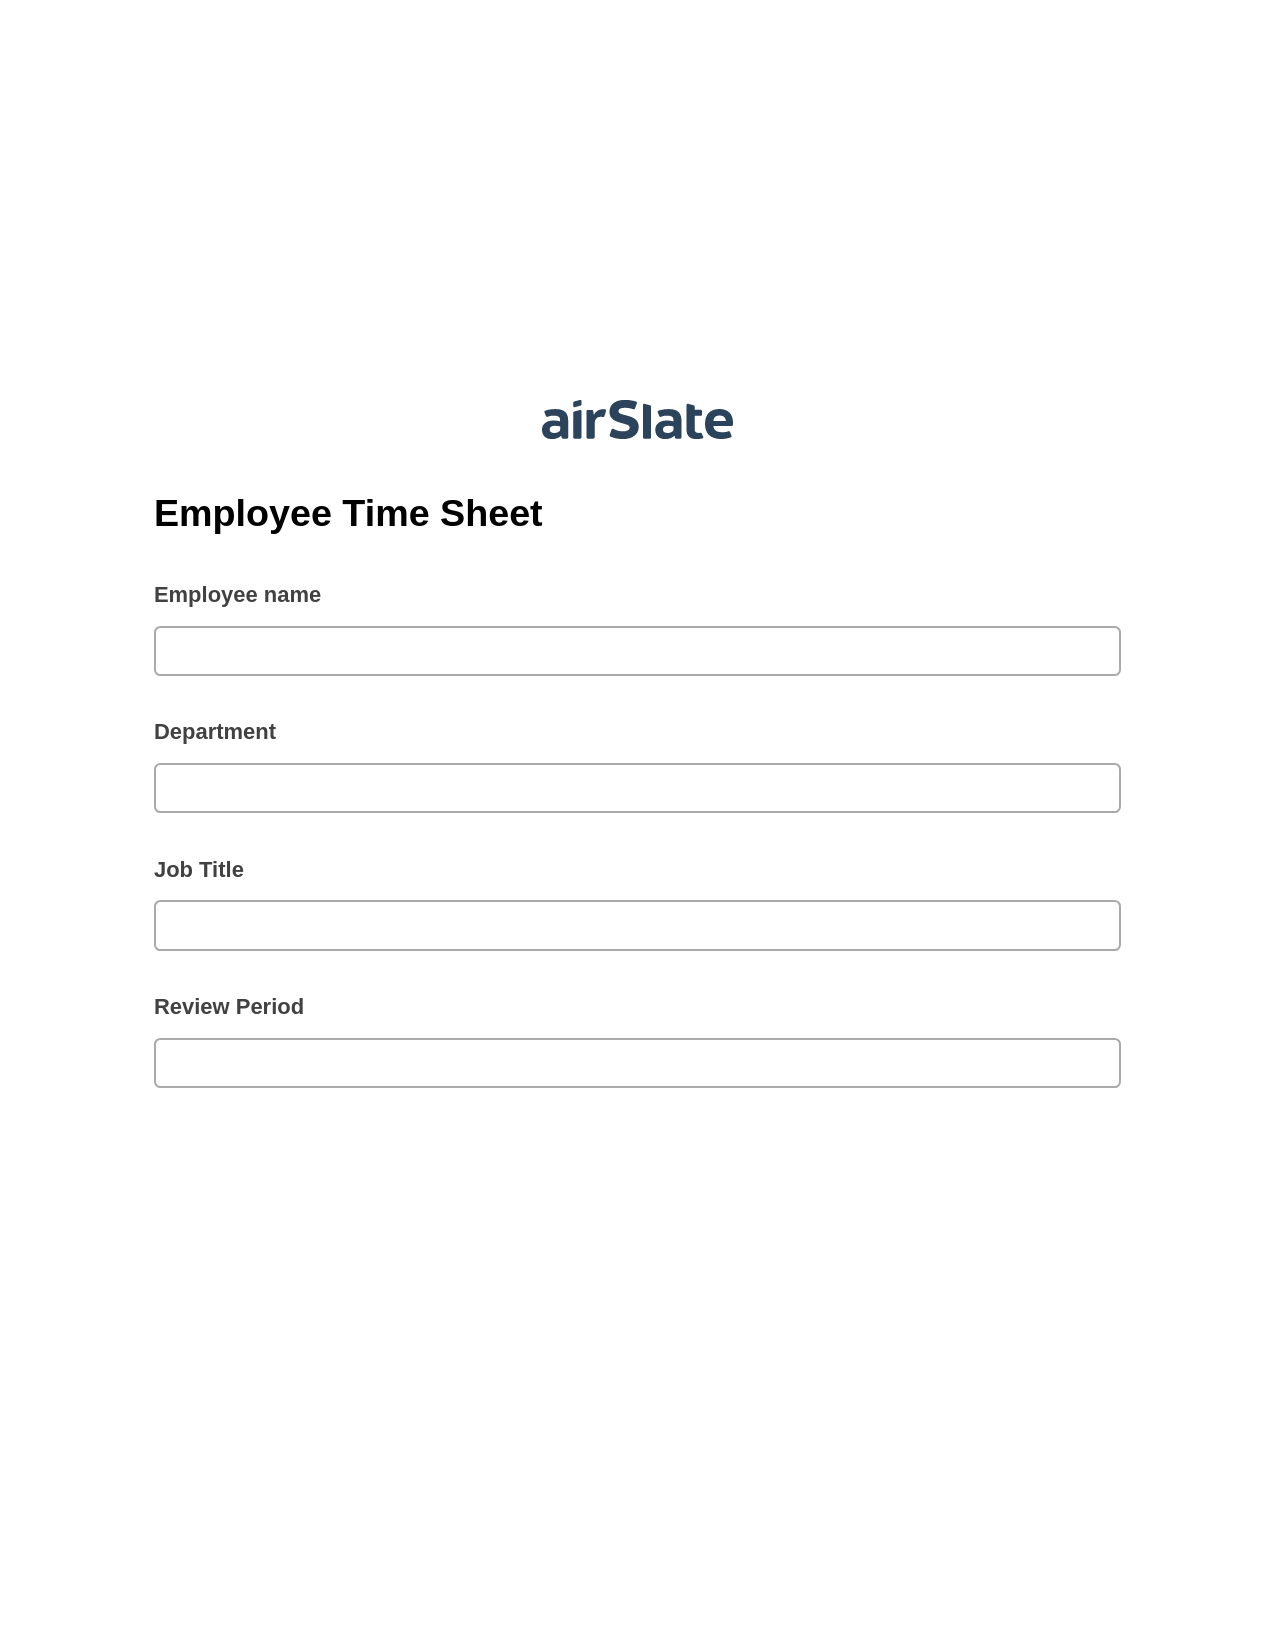 Employee Time Sheet Pre-fill Dropdowns from Excel Bot, Create Salesforce Records Bot, Export to NetSuite Bot